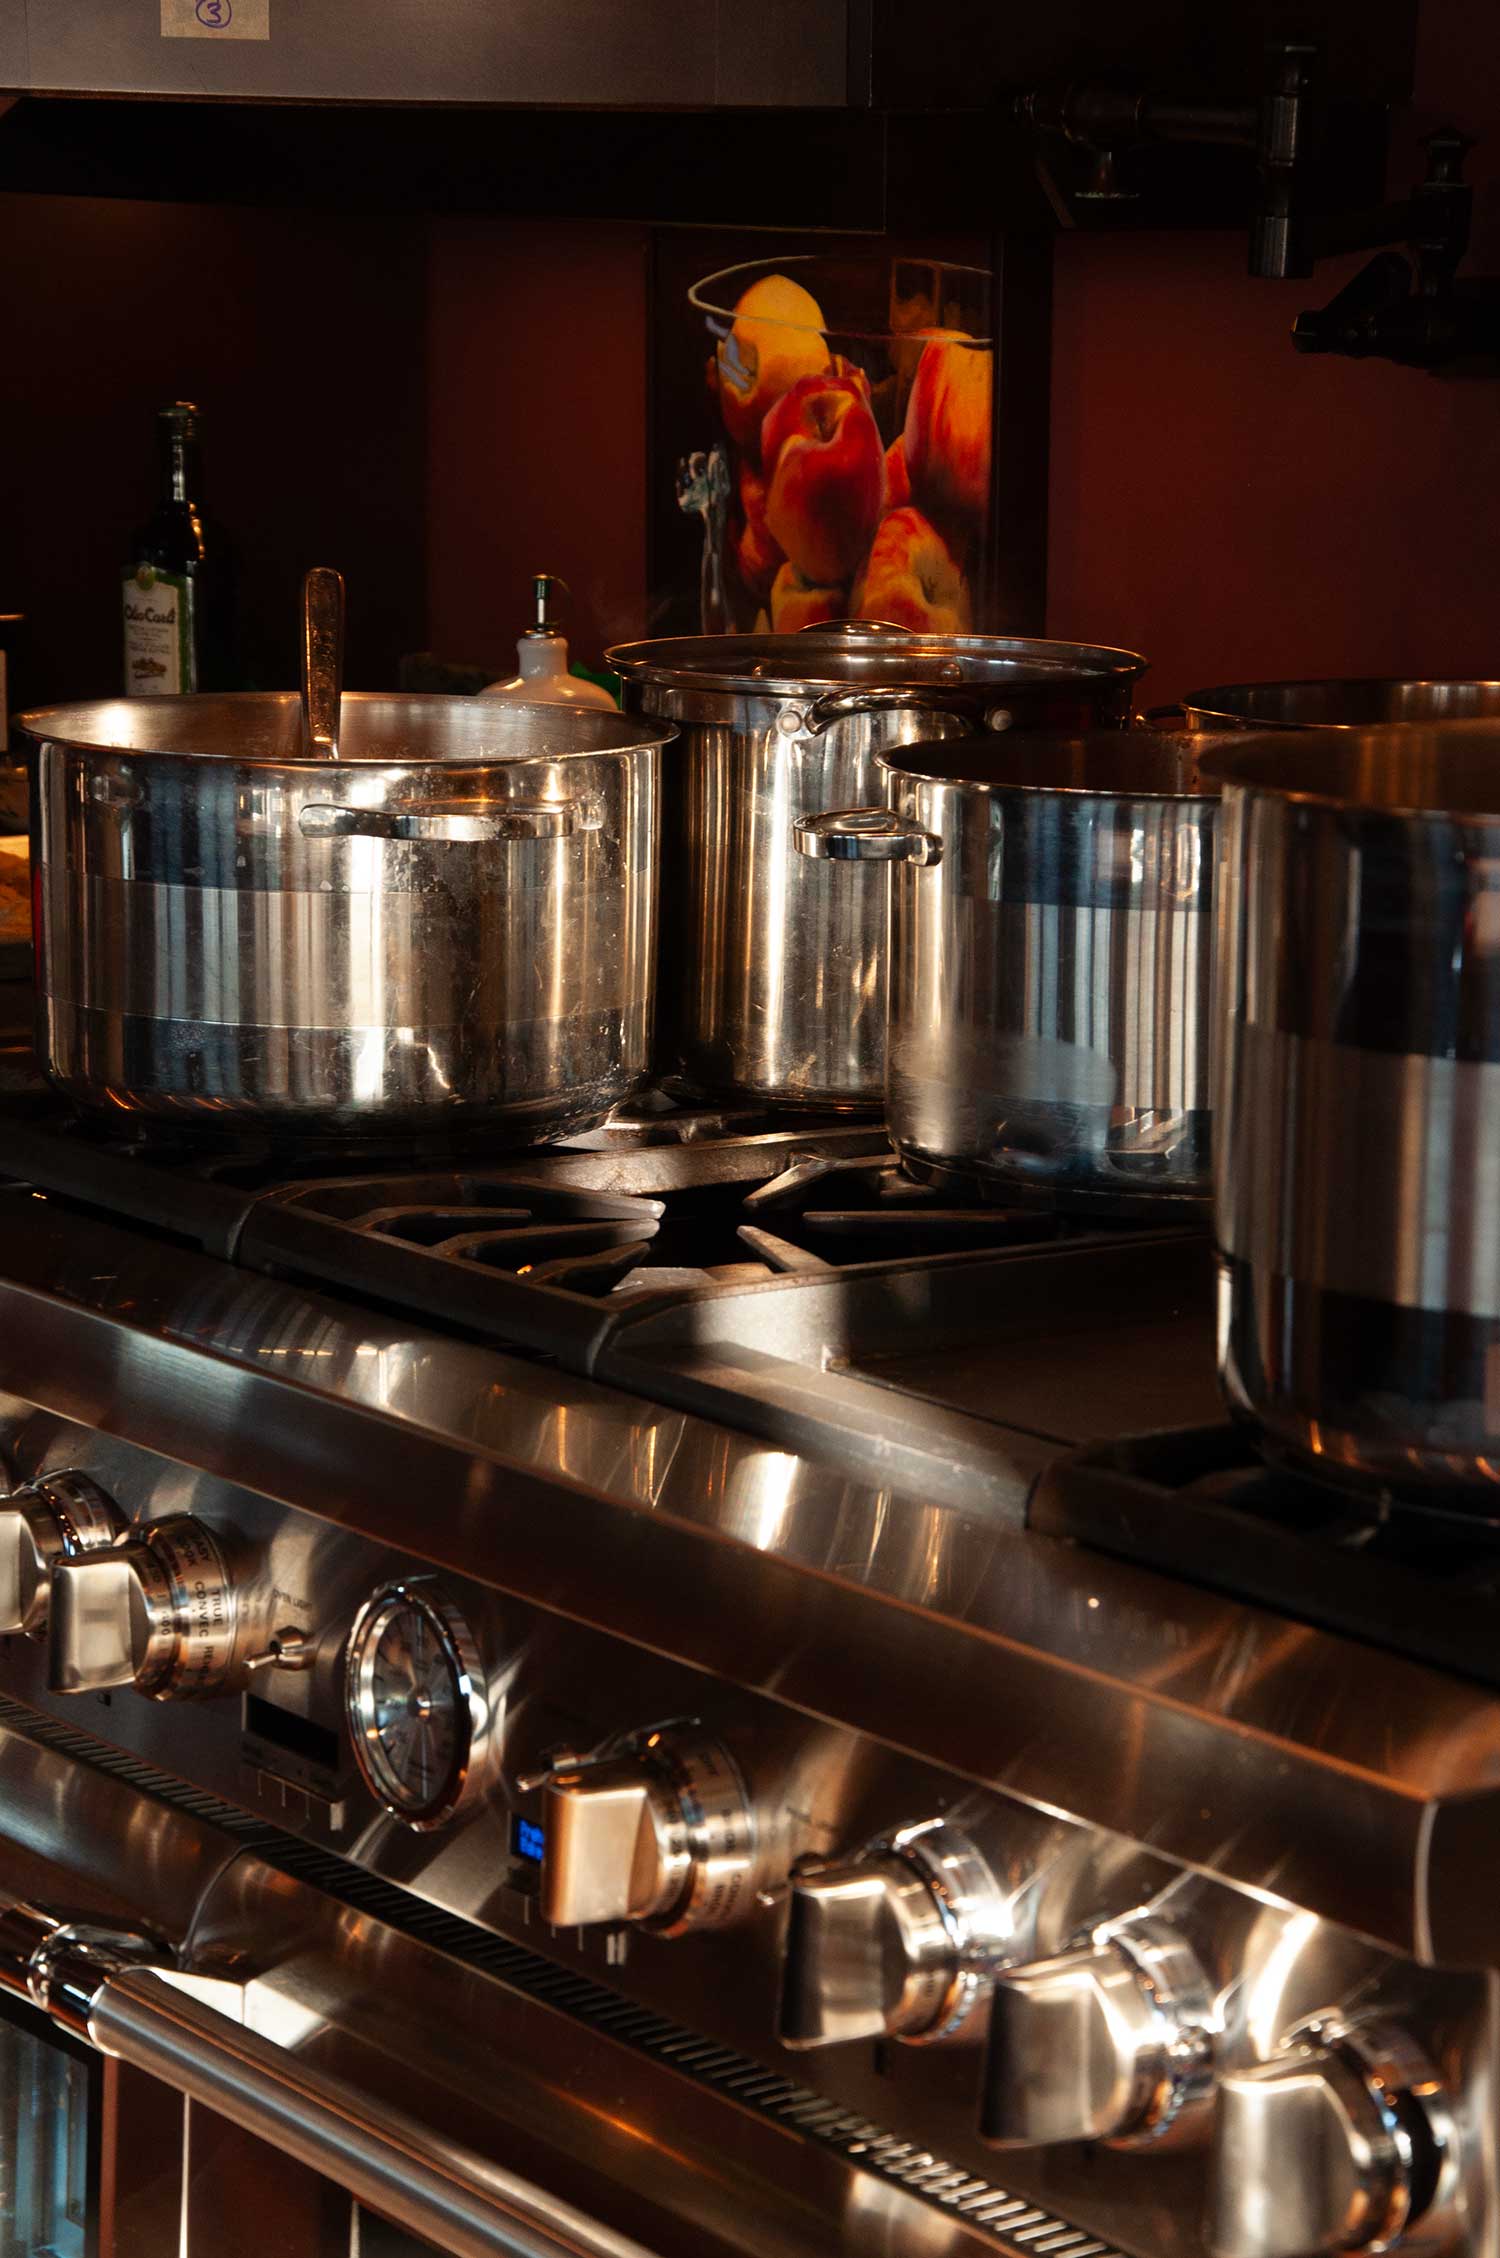 A collection of large pots on a stovetop.